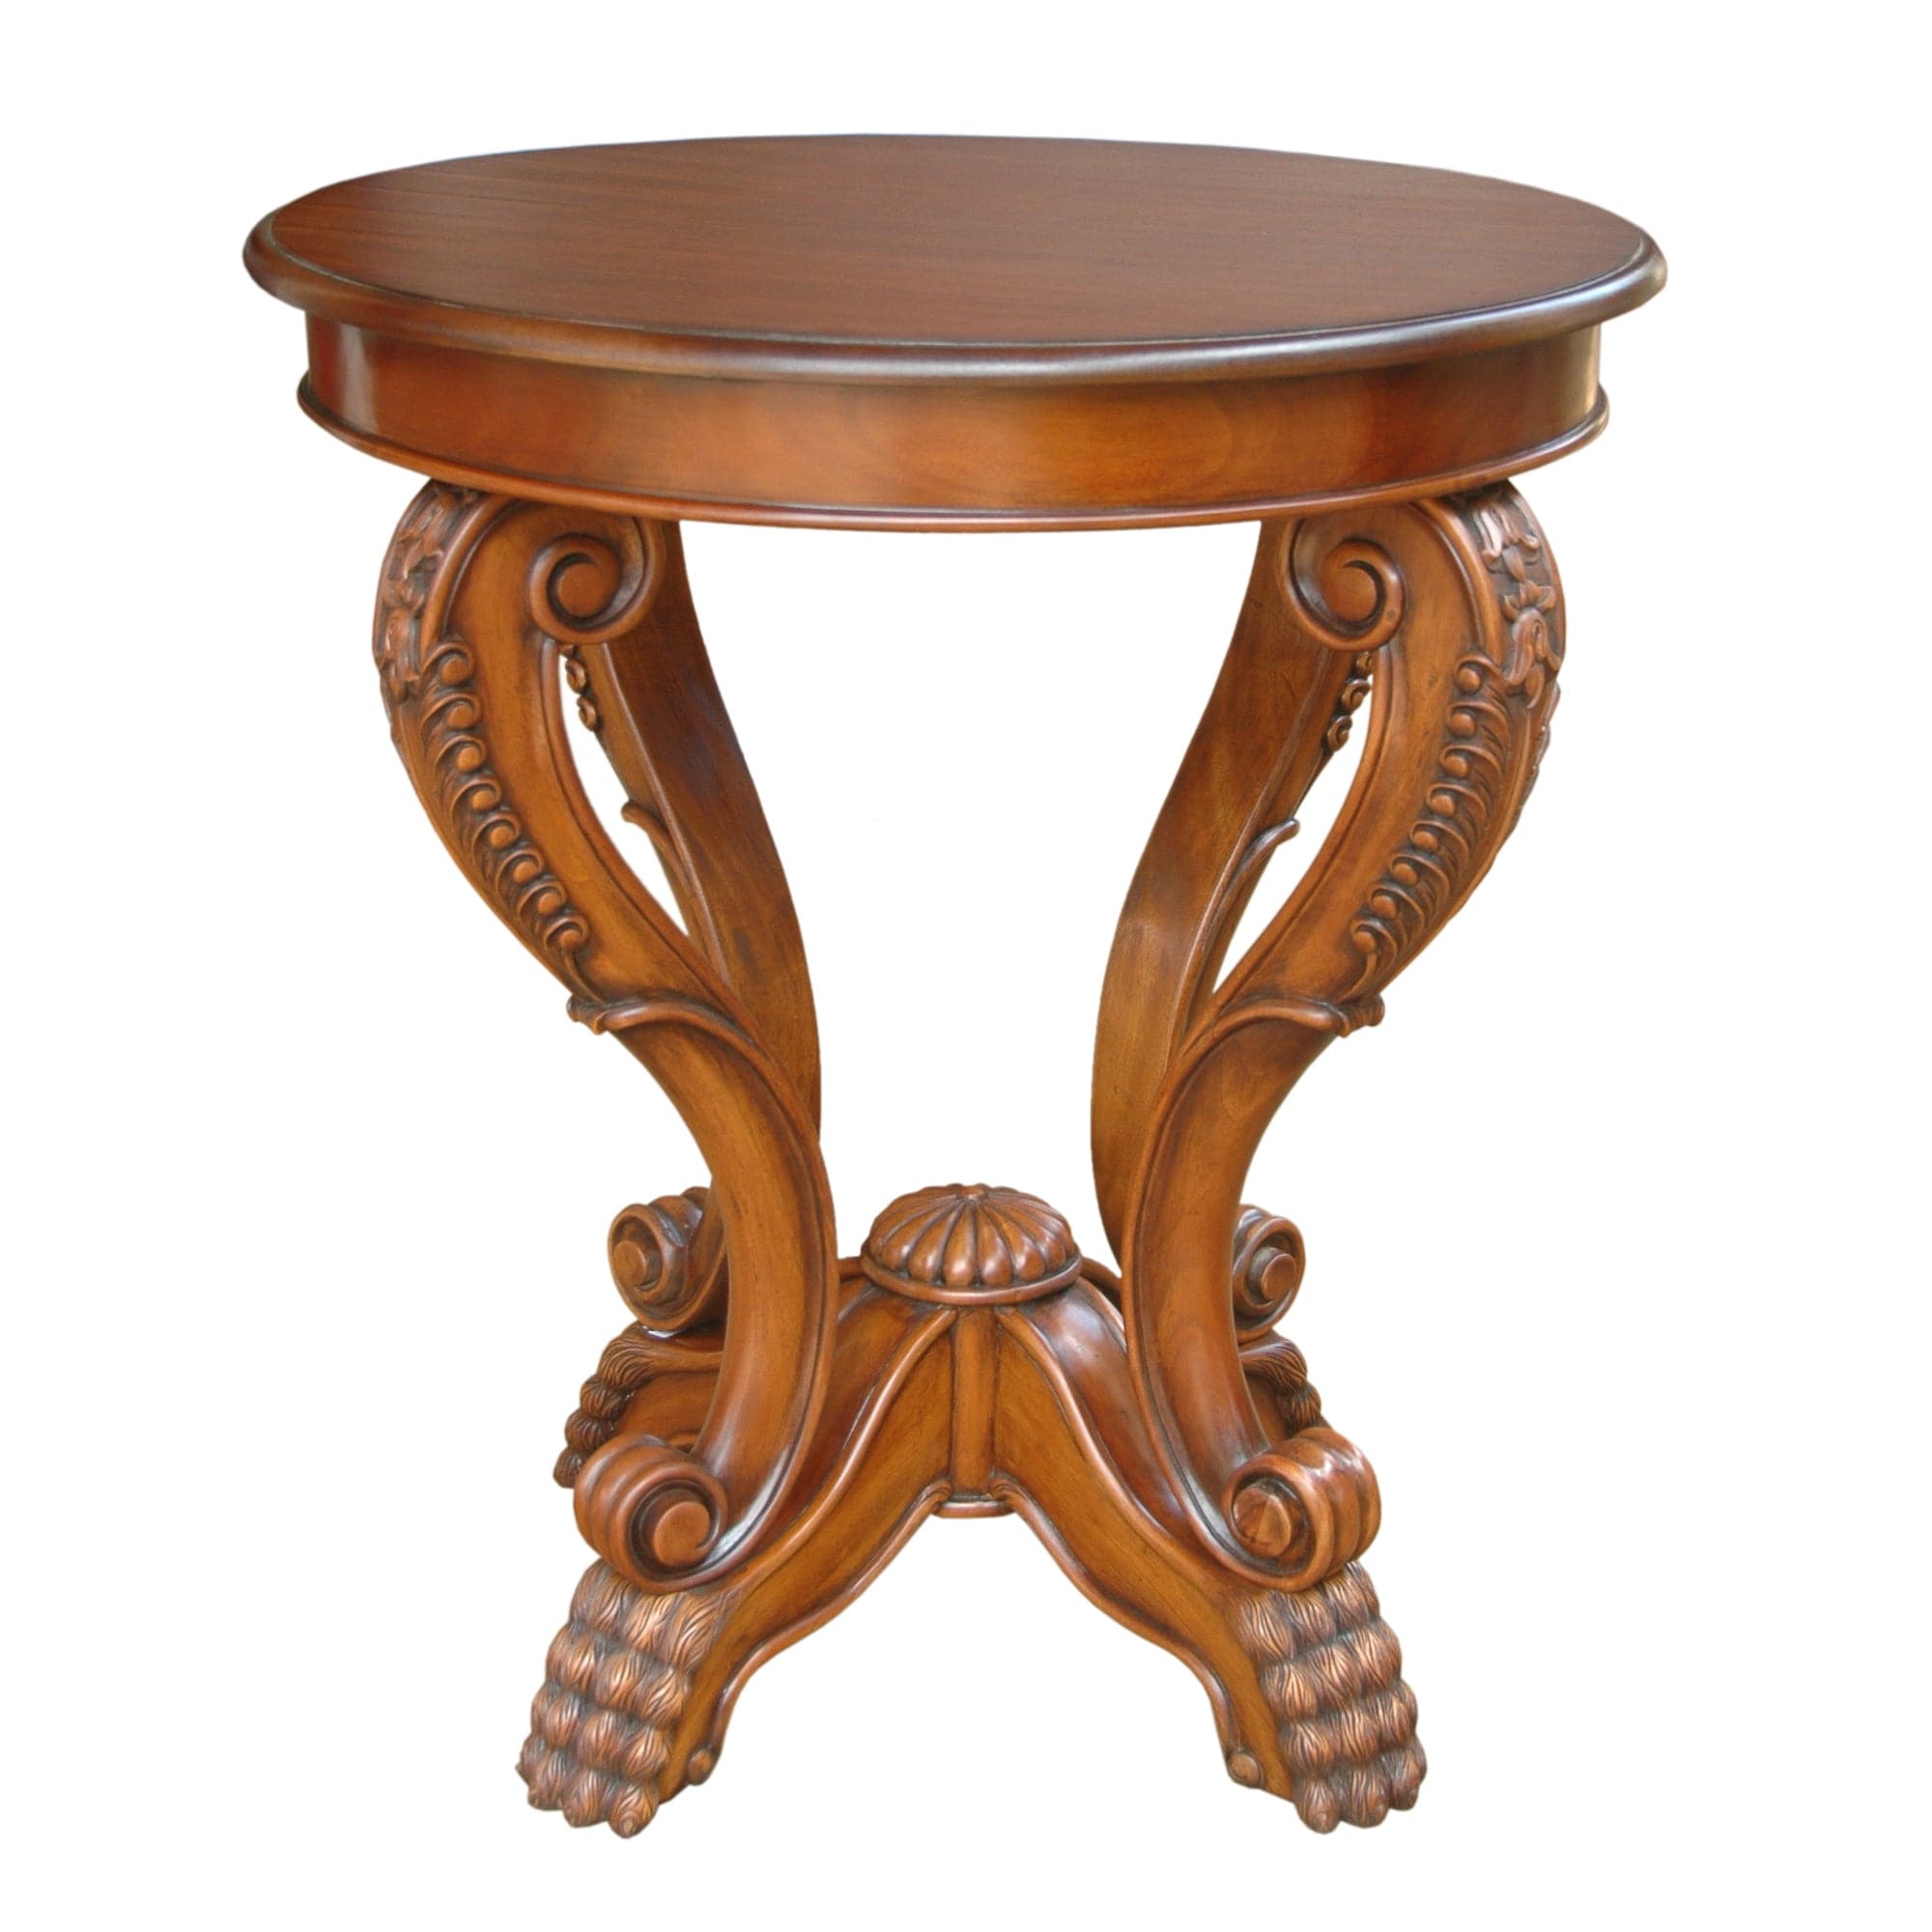 Victorian Claw Feet Side Table - Molaix82045298147VictorianST-189